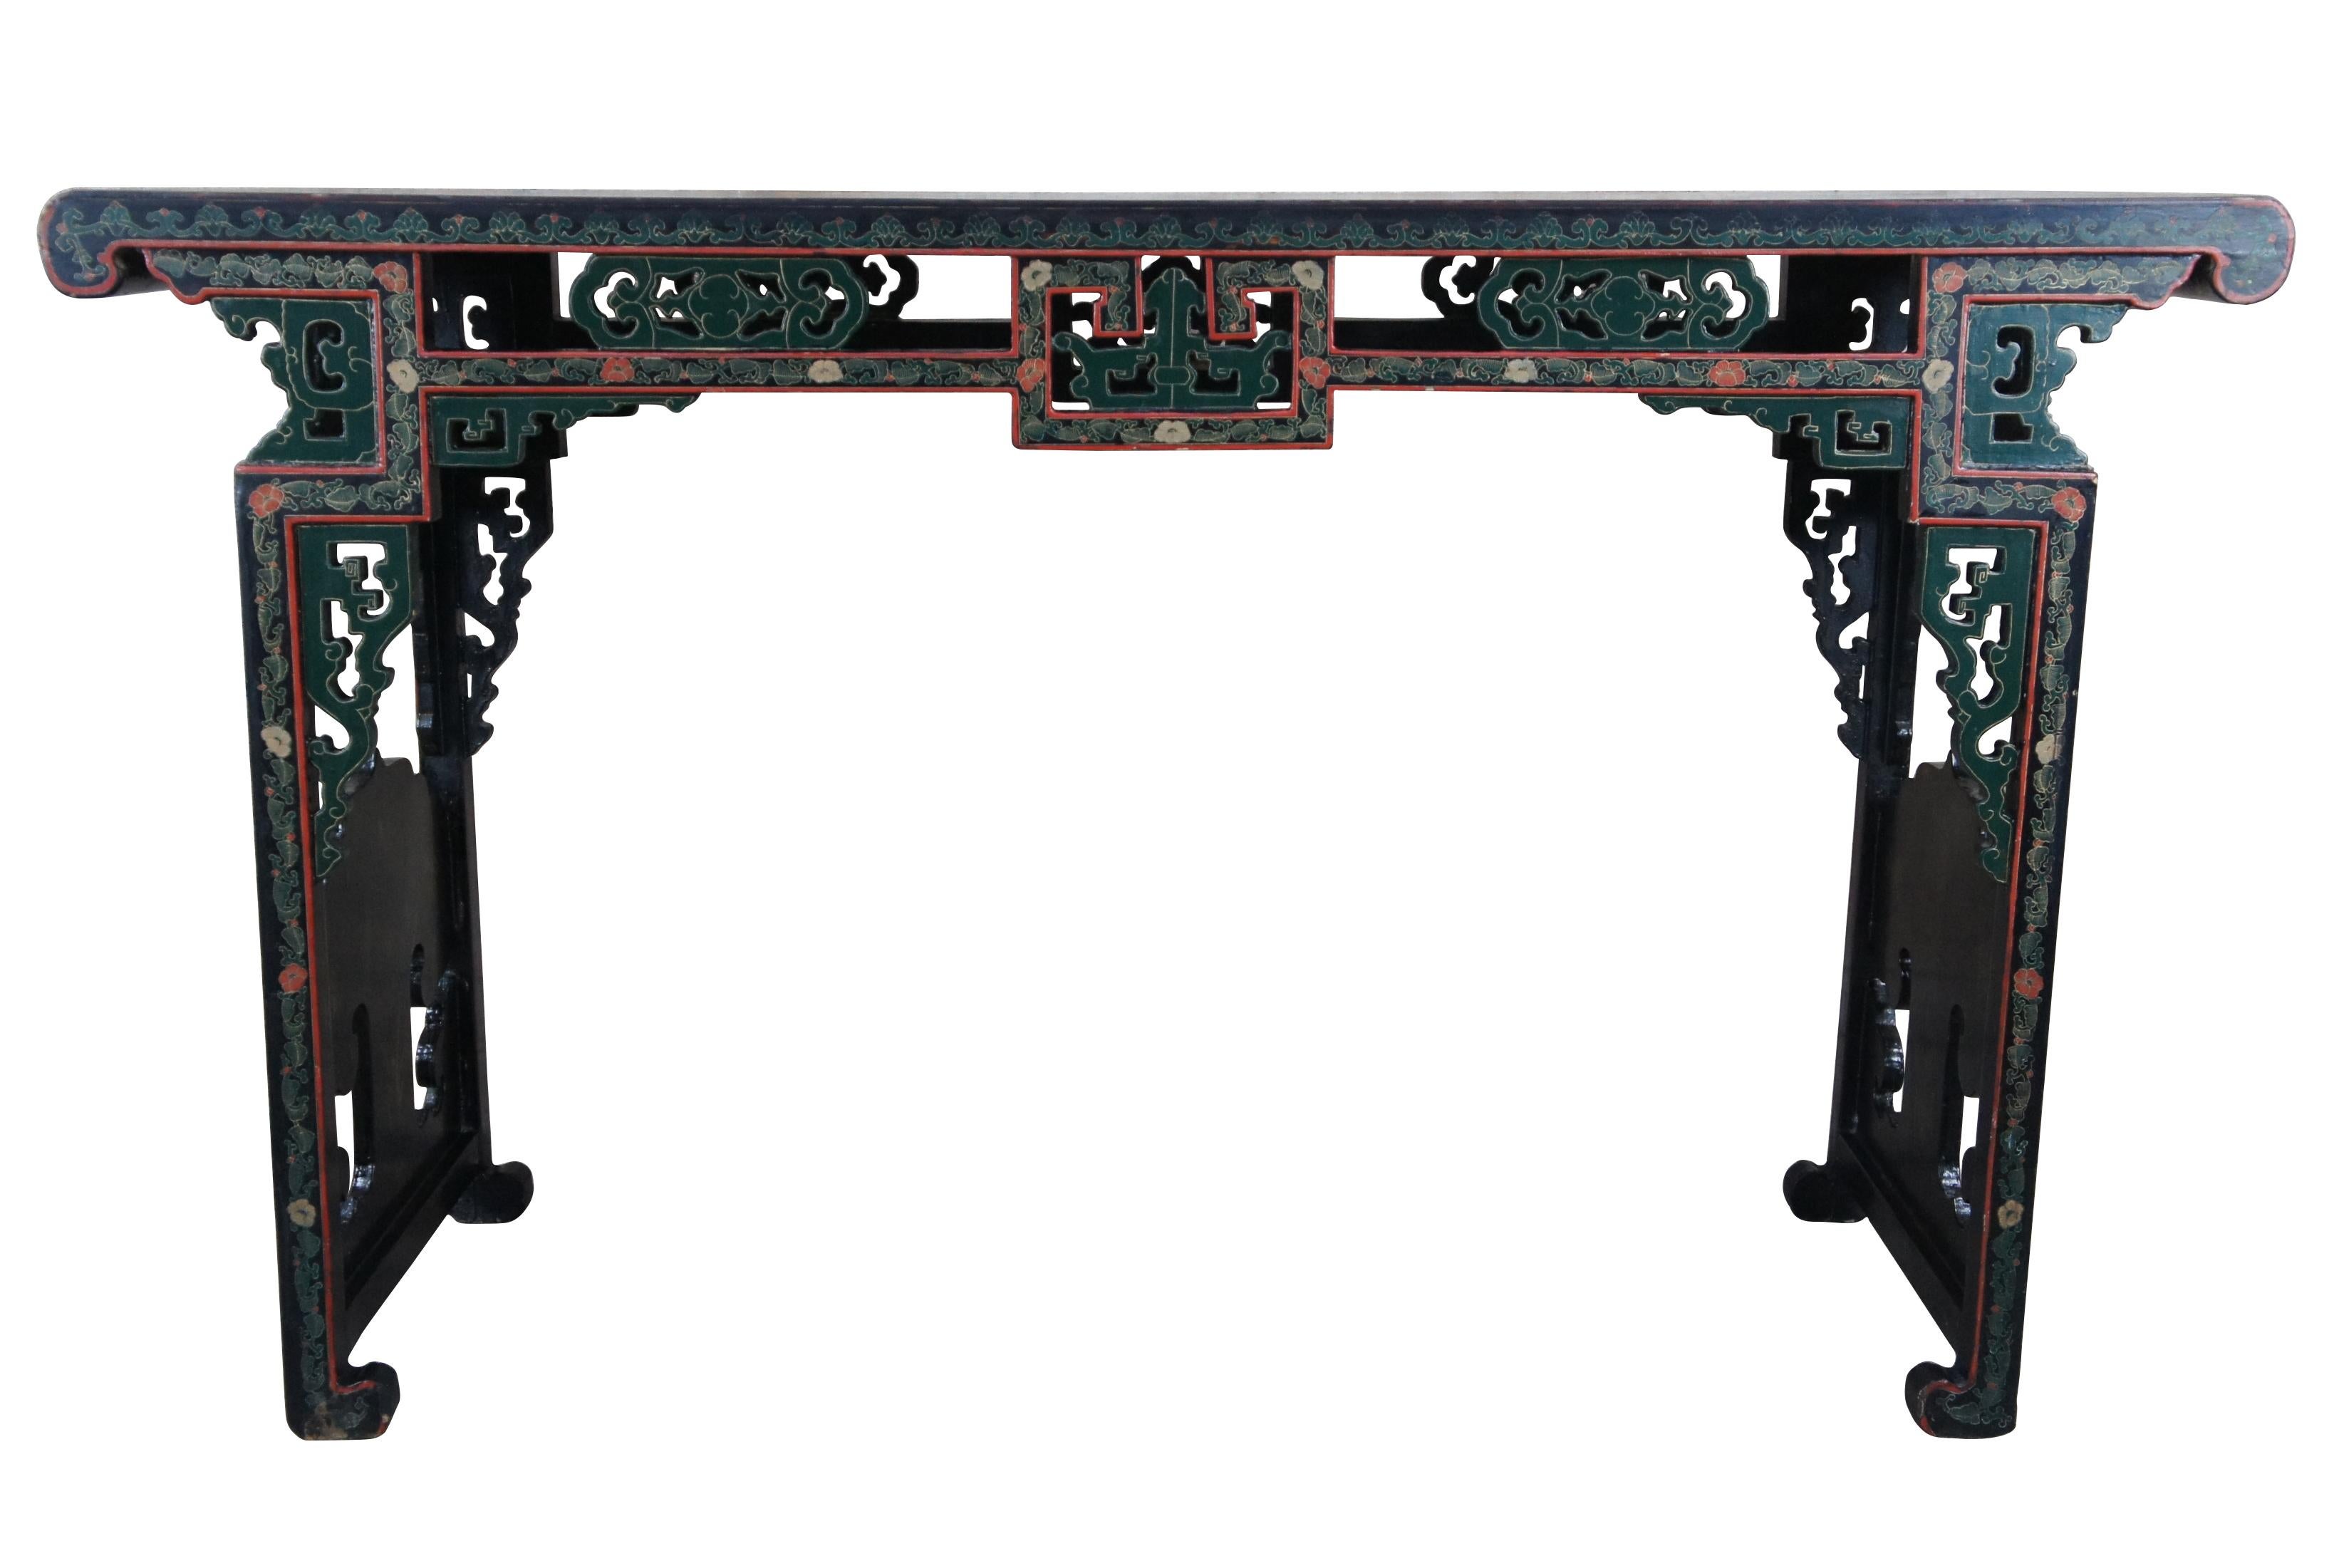 Vintage Jinlong Ming style altar console table featuring reticulated accents with a floral rose bamboo and bird scene with black lacquered field and vibrant greens and reds. 

Made in the Beijing Gold Inlaid Lacquer Furniture Factory.